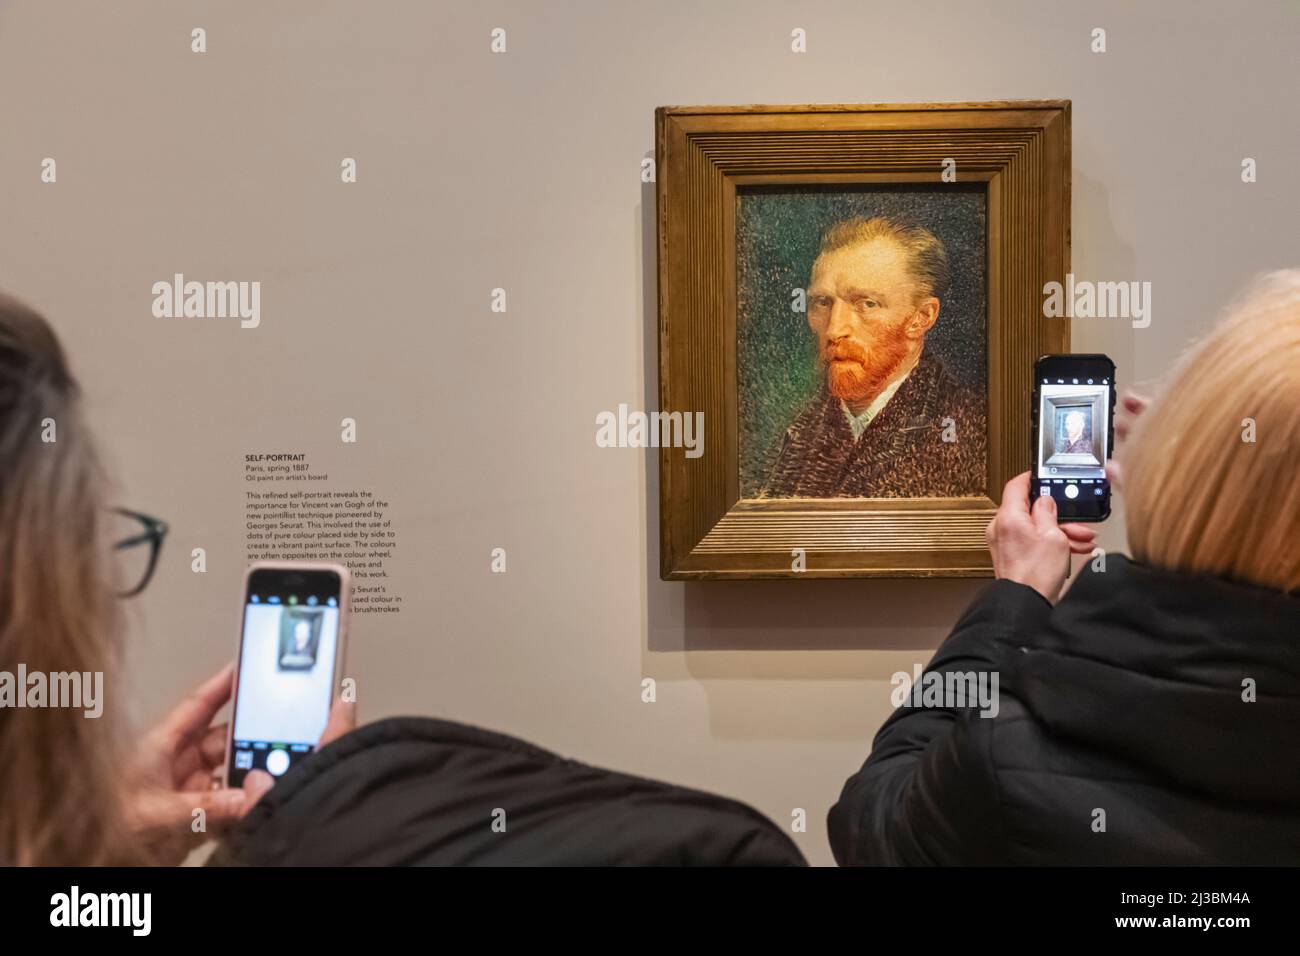 Gallery Visitors Taking Photos with Smartphone of a Vincent van Gogh Self  Portrait Painting Stock Photo - Alamy